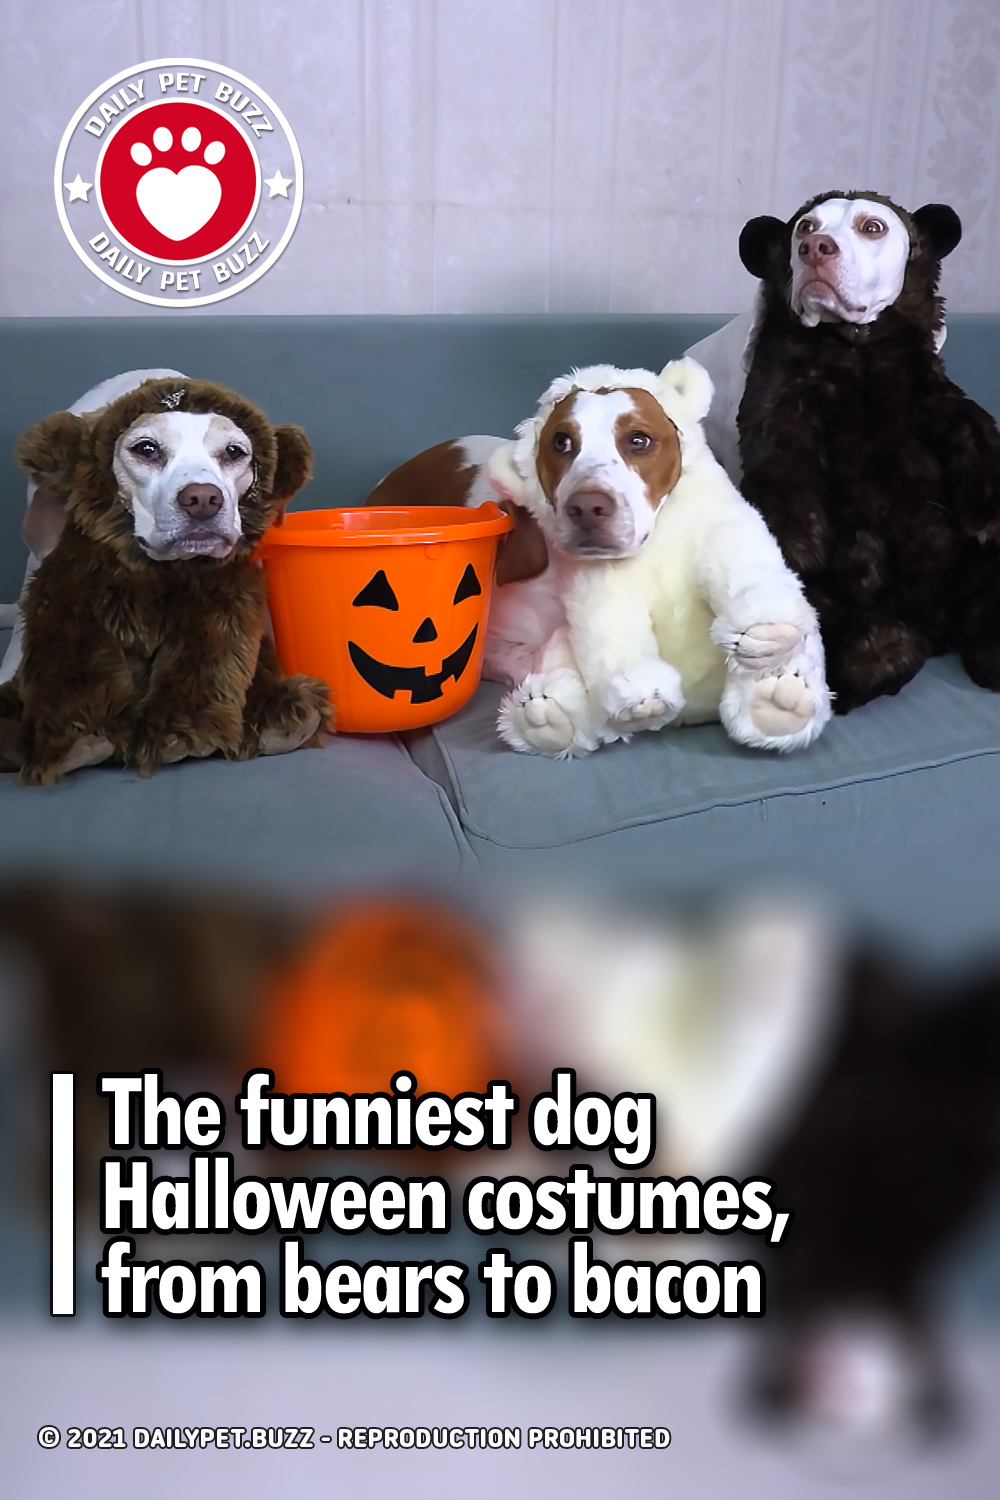 The funniest dog Halloween costumes, from bears to bacon